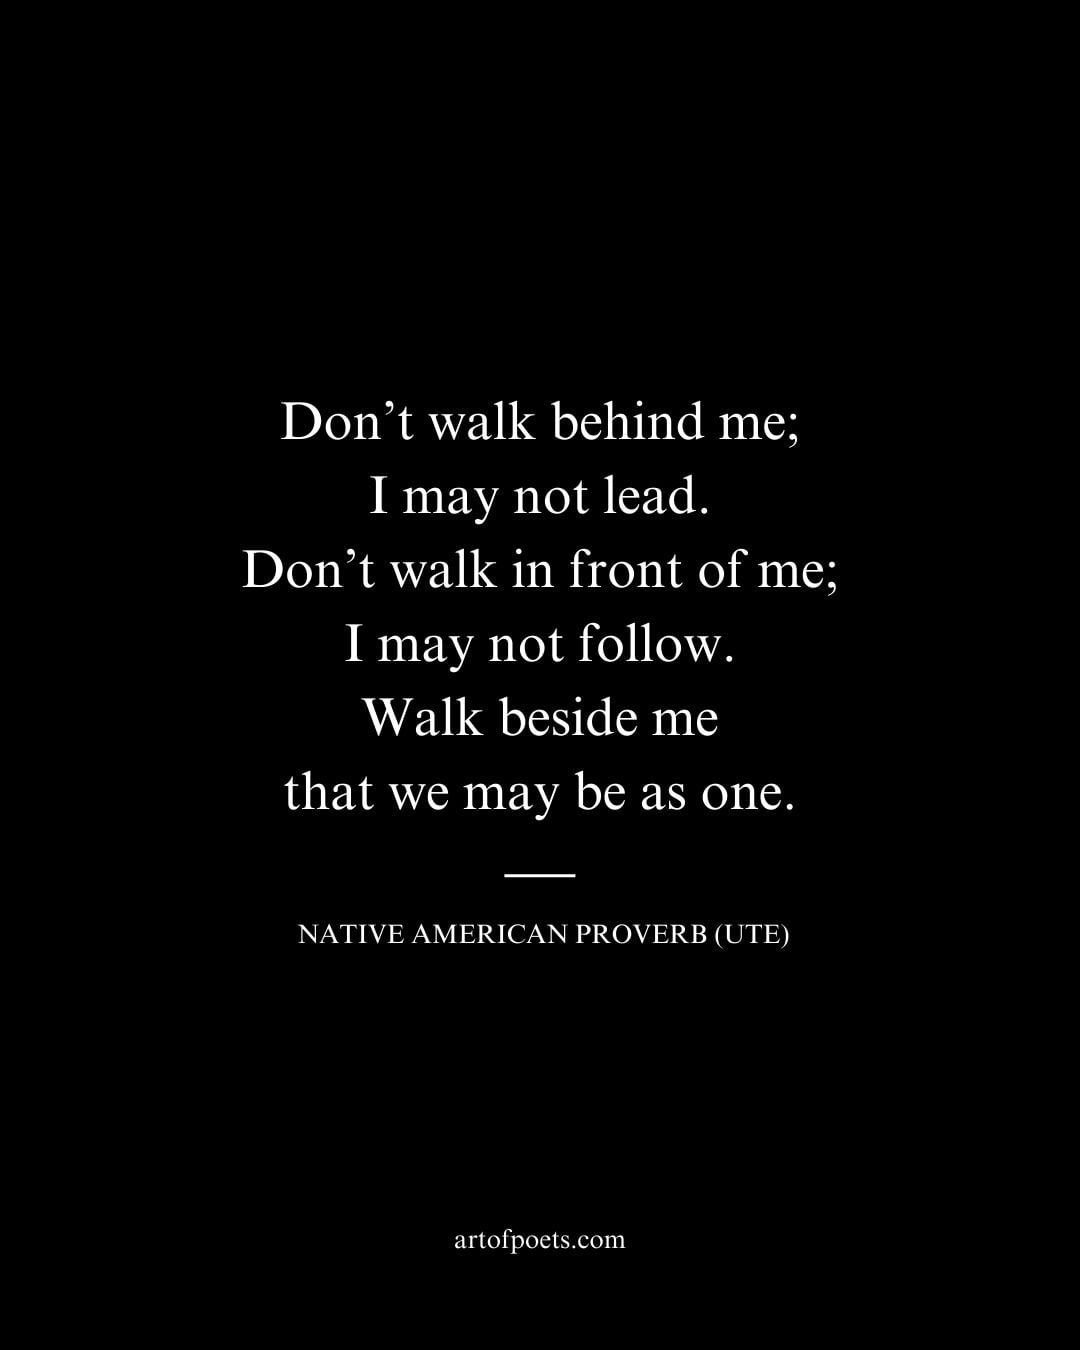 Dont walk behind me I may not lead. Dont walk in front of me I may not follow. native american proverb